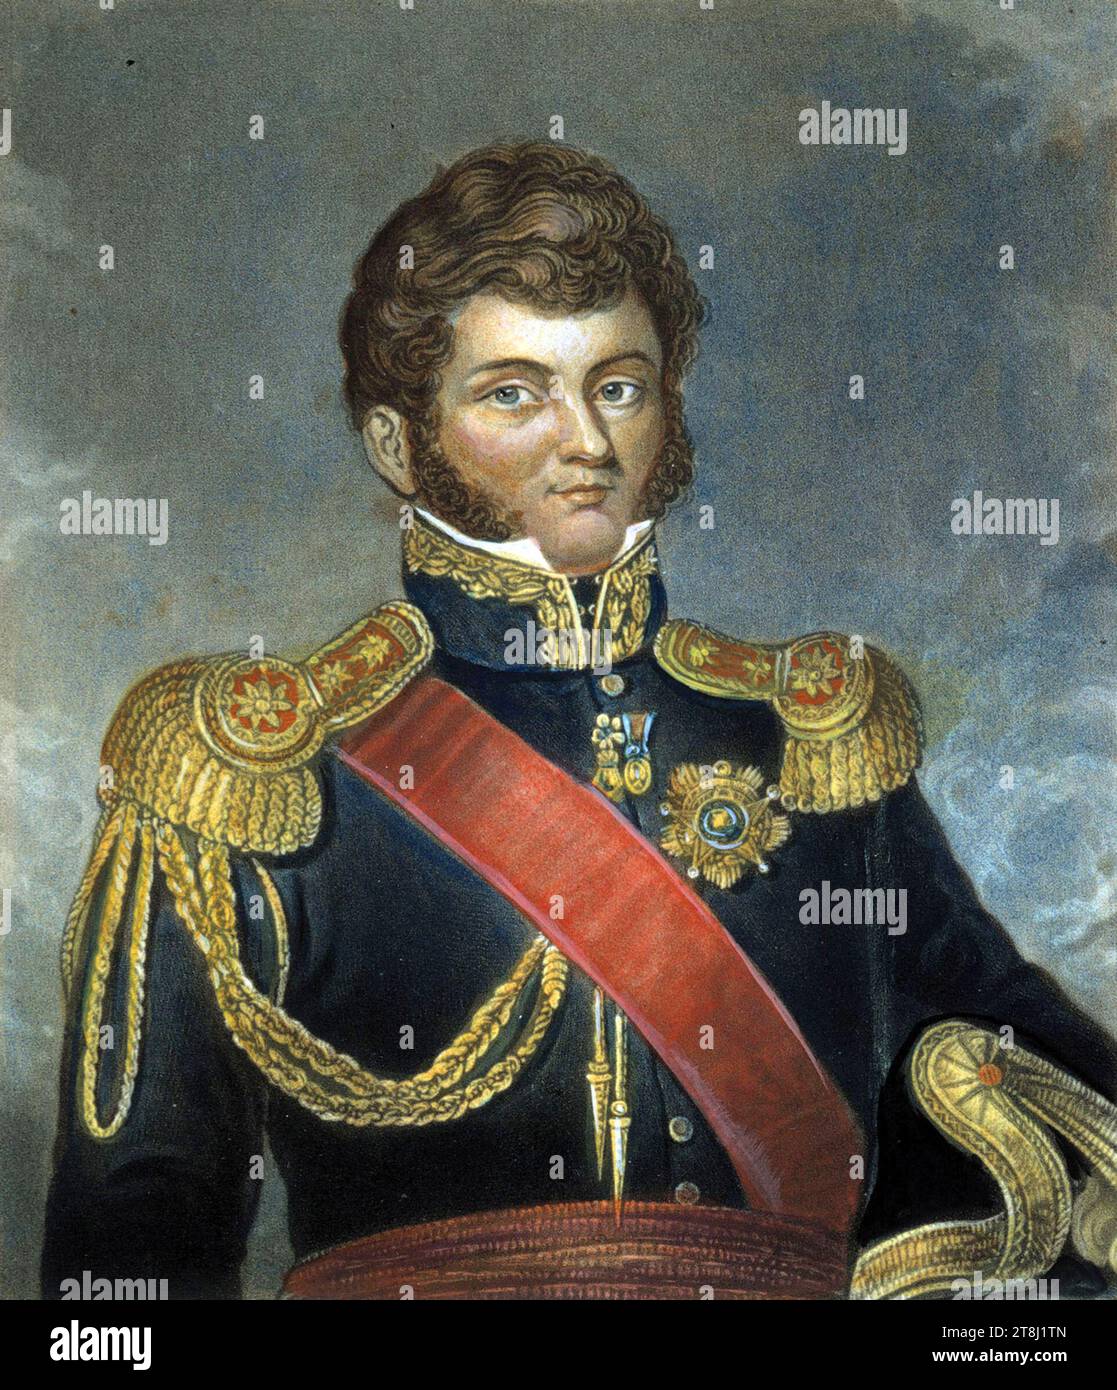 Bernardo O'Higgins Riquelme (1778 – 1842) Chilean independence leader who freed Chile from Spanish rule in the Chilean War of Independence. Stock Photo